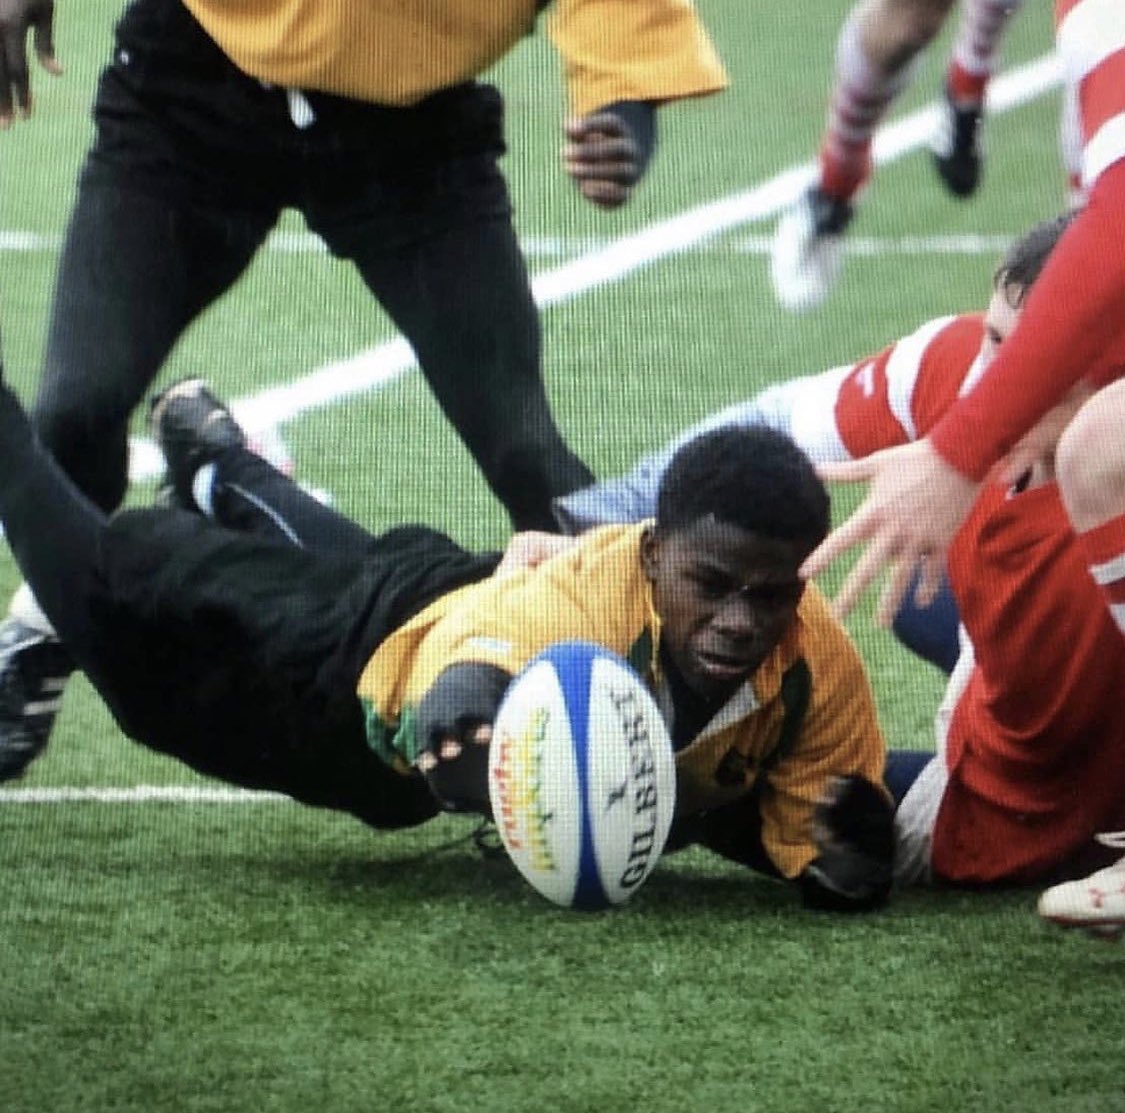 Throwback to that time when DaBaby use to play rugby